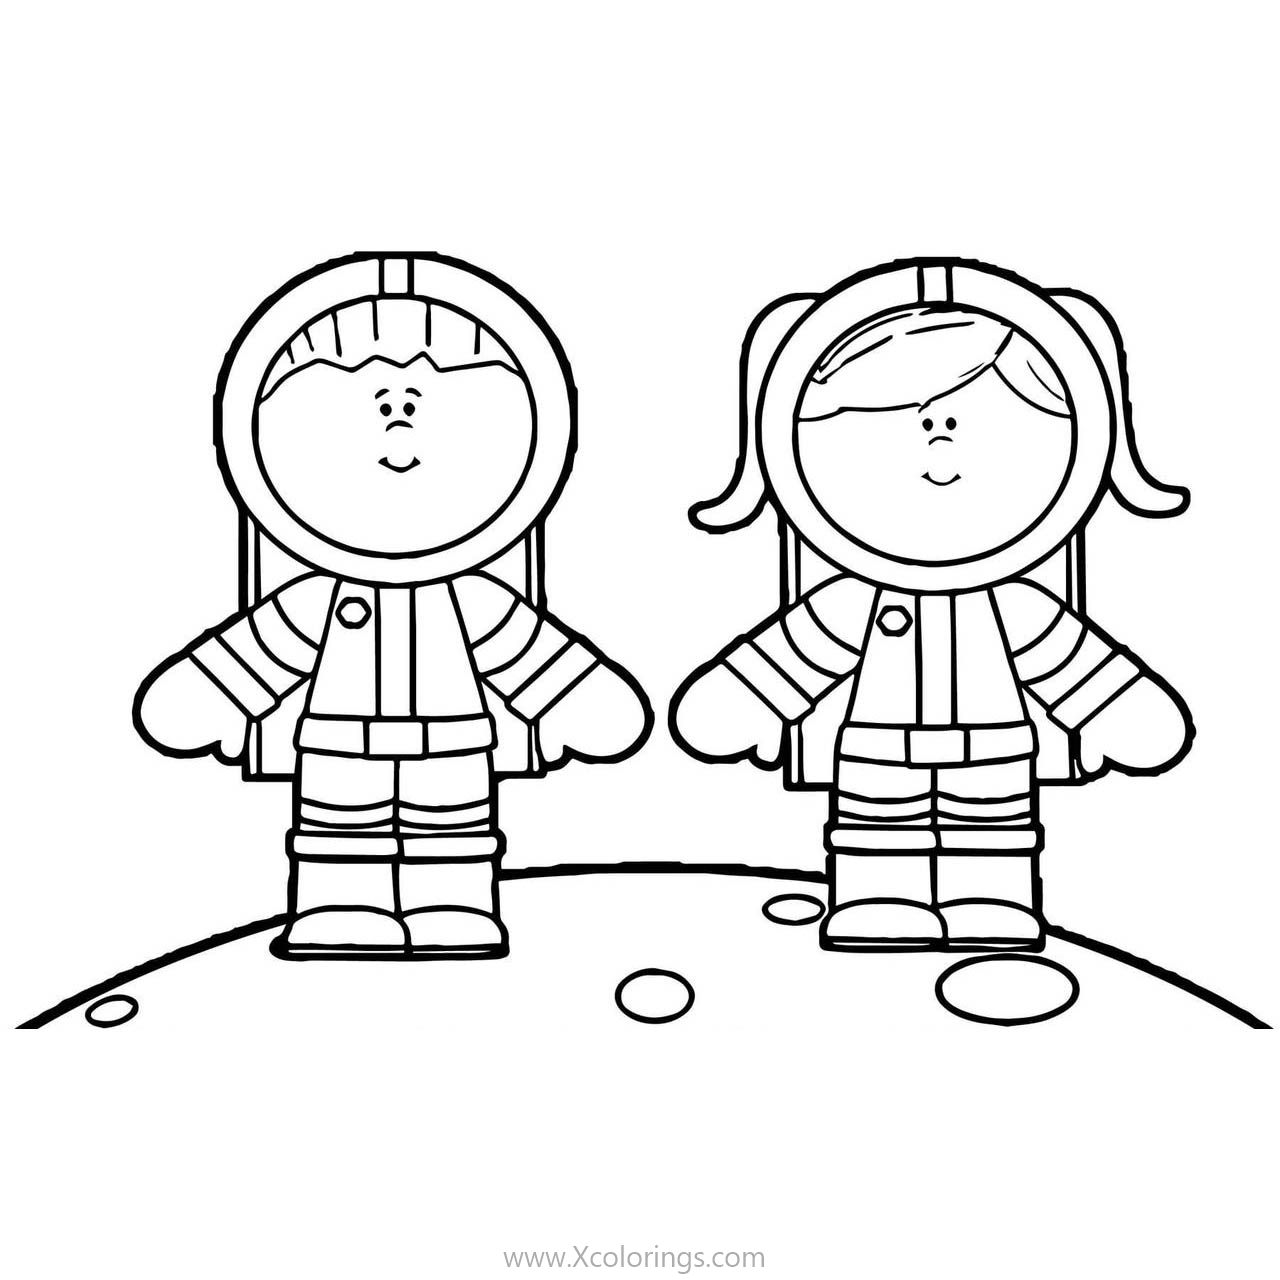 Free Cute Astronaut Coloring Pages Boy and Girl printable